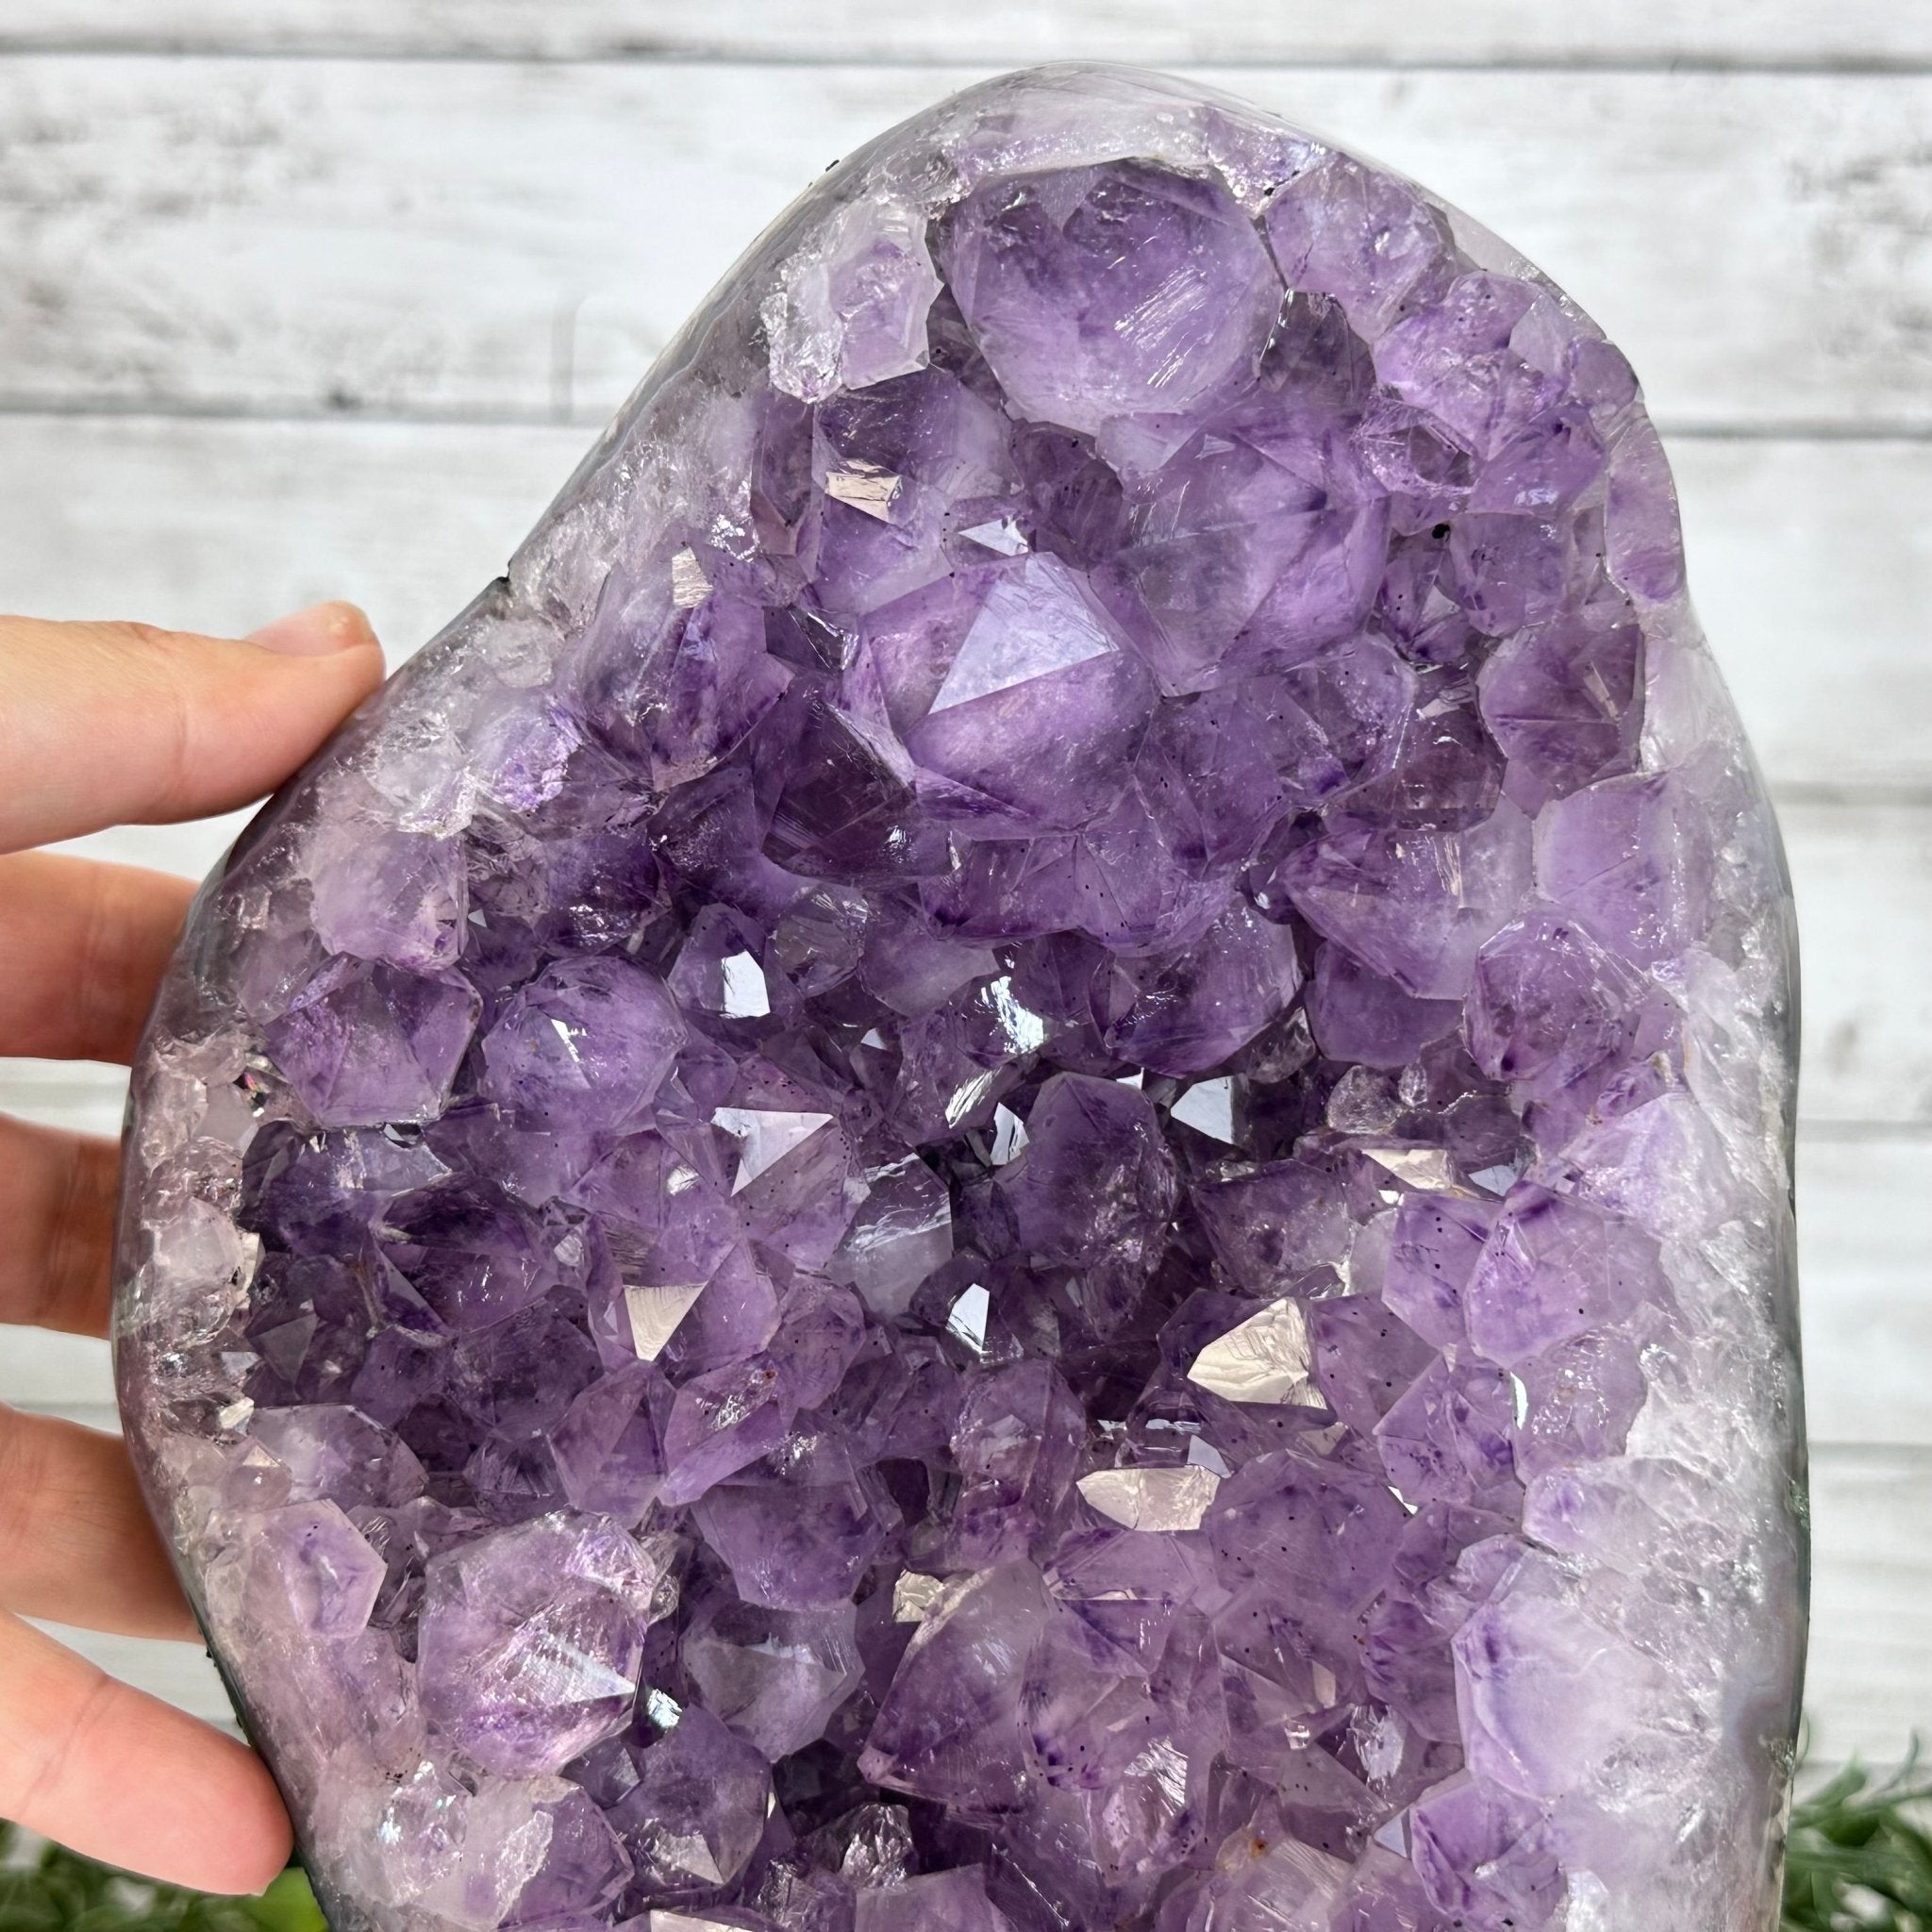 Extra Quality Amethyst Cluster on Cement Base, 12 lbs & 11.75" Tall #5614-0098 - Brazil GemsBrazil GemsExtra Quality Amethyst Cluster on Cement Base, 12 lbs & 11.75" Tall #5614-0098Clusters on Cement Bases5614-0098